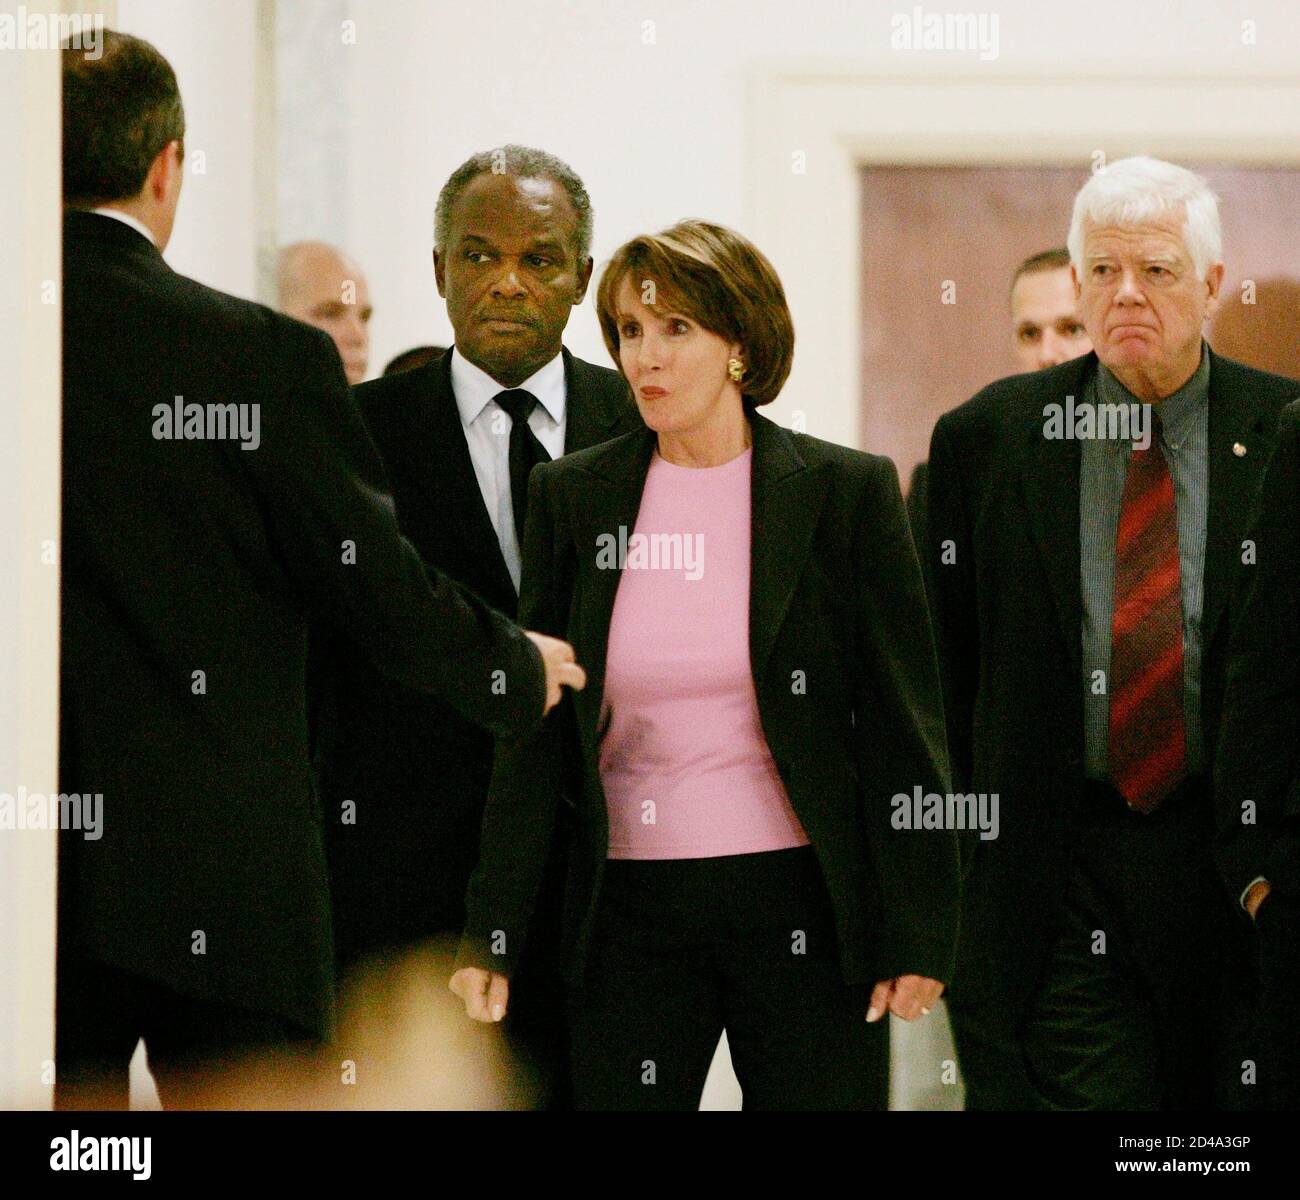 U.S. House Minority Leader Nancy Pelosi (D-CA) leads a group of congressmen into the House Committee on Armed Services room to view unreleased photographs on the abuse of Iraqi prisoners at the Abu Ghraib prison in Iraq by U.S. military personnel, May 12, 2004. REUTERS/Larry Downing  LSD/SV Stock Photo